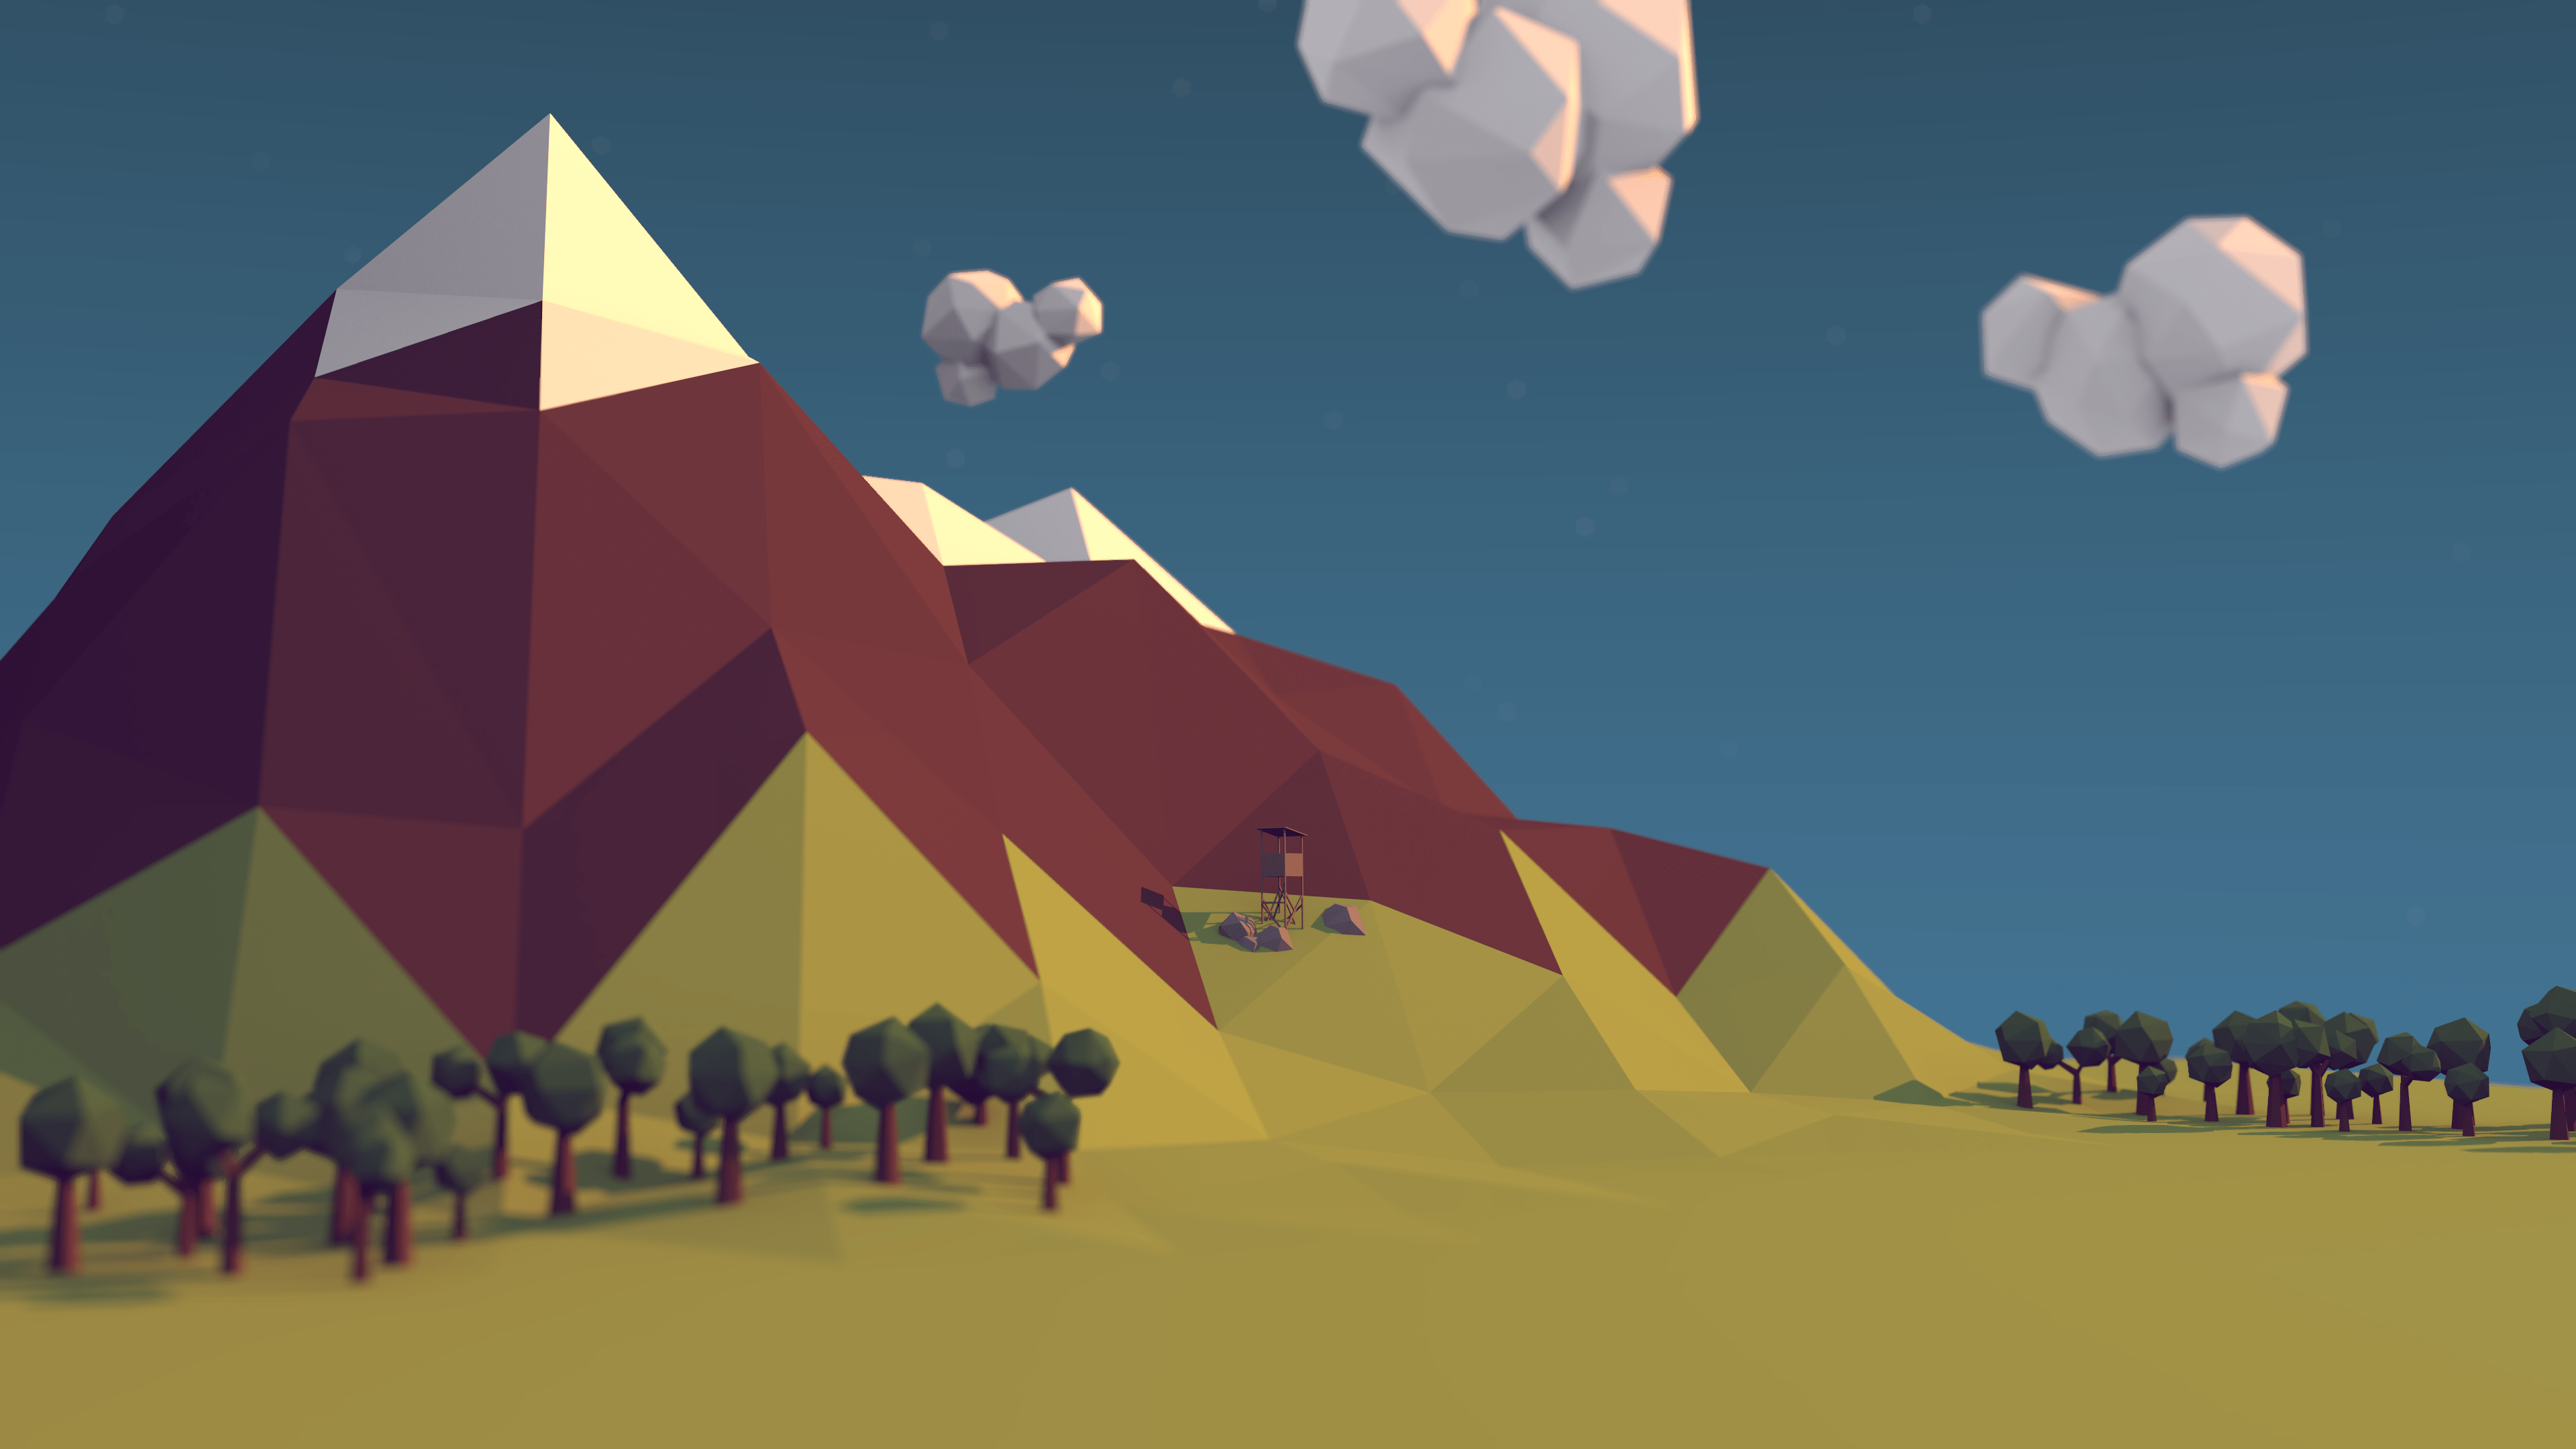 I Need To Make A Game With Low Poly Aesthetics. Should I Use This Engine Or Unity?